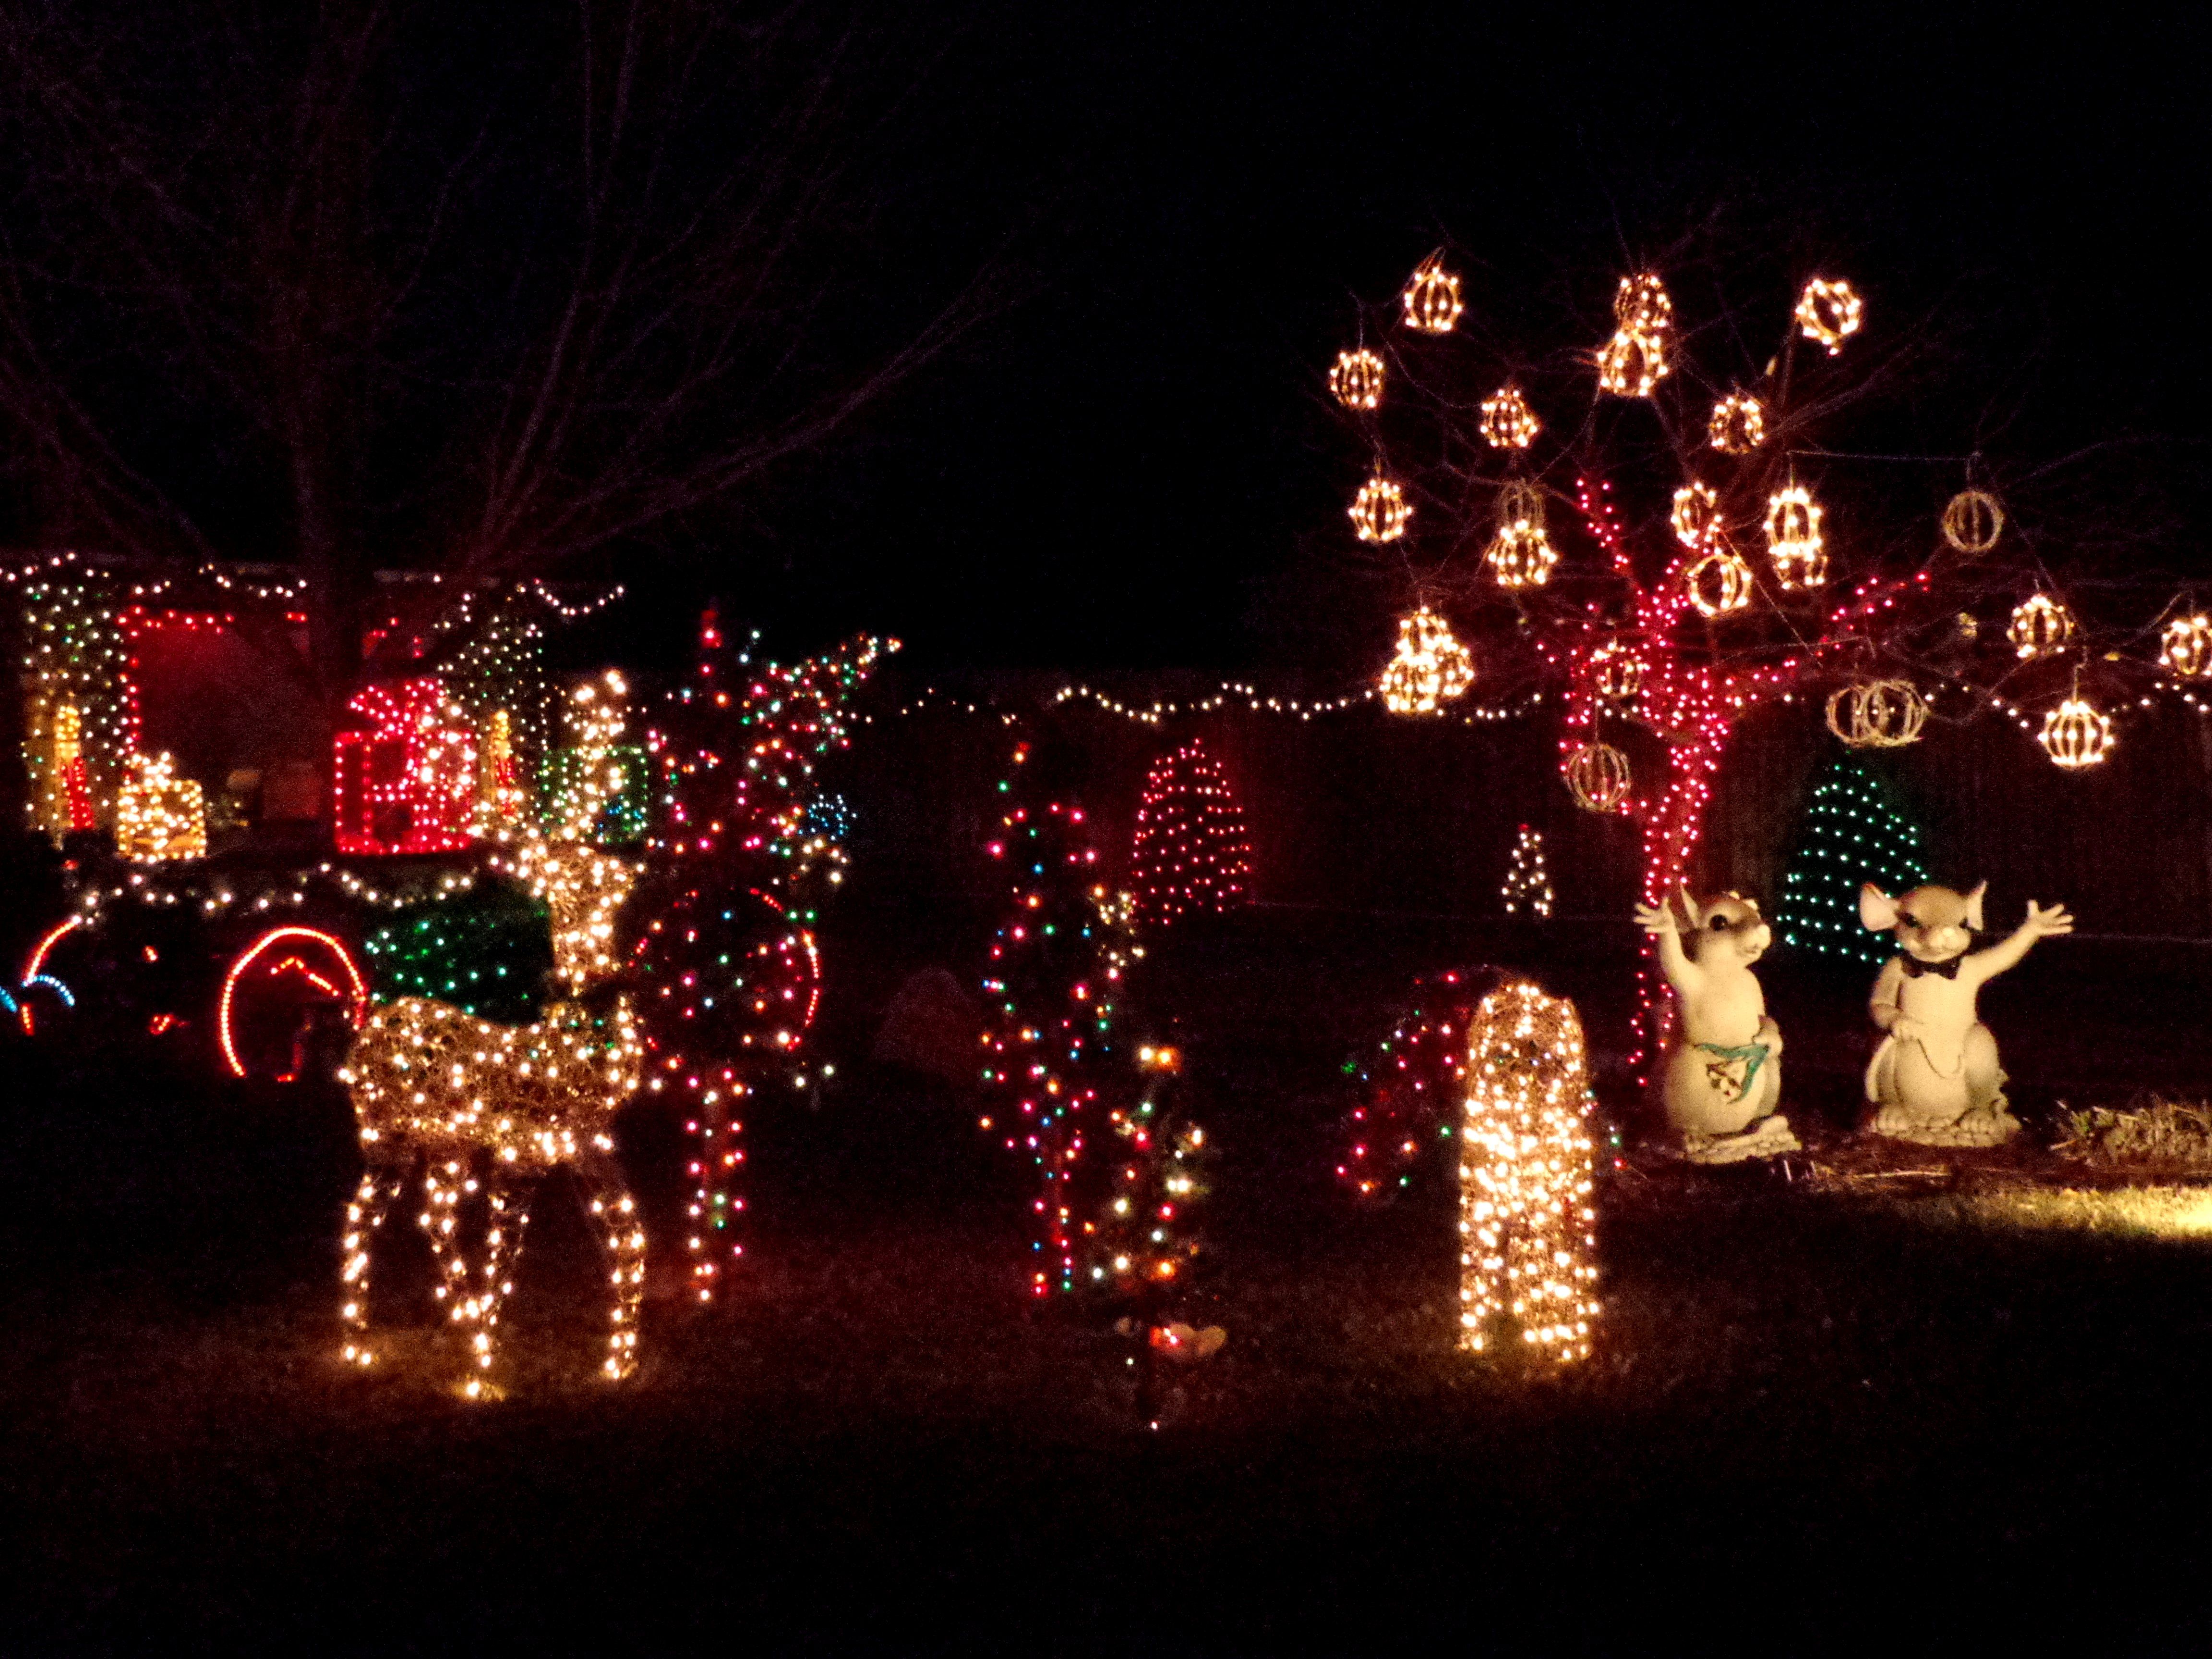 Holiday Lights Christmas Yard Decorations Picture. Free Photograph. Photo Public Domain